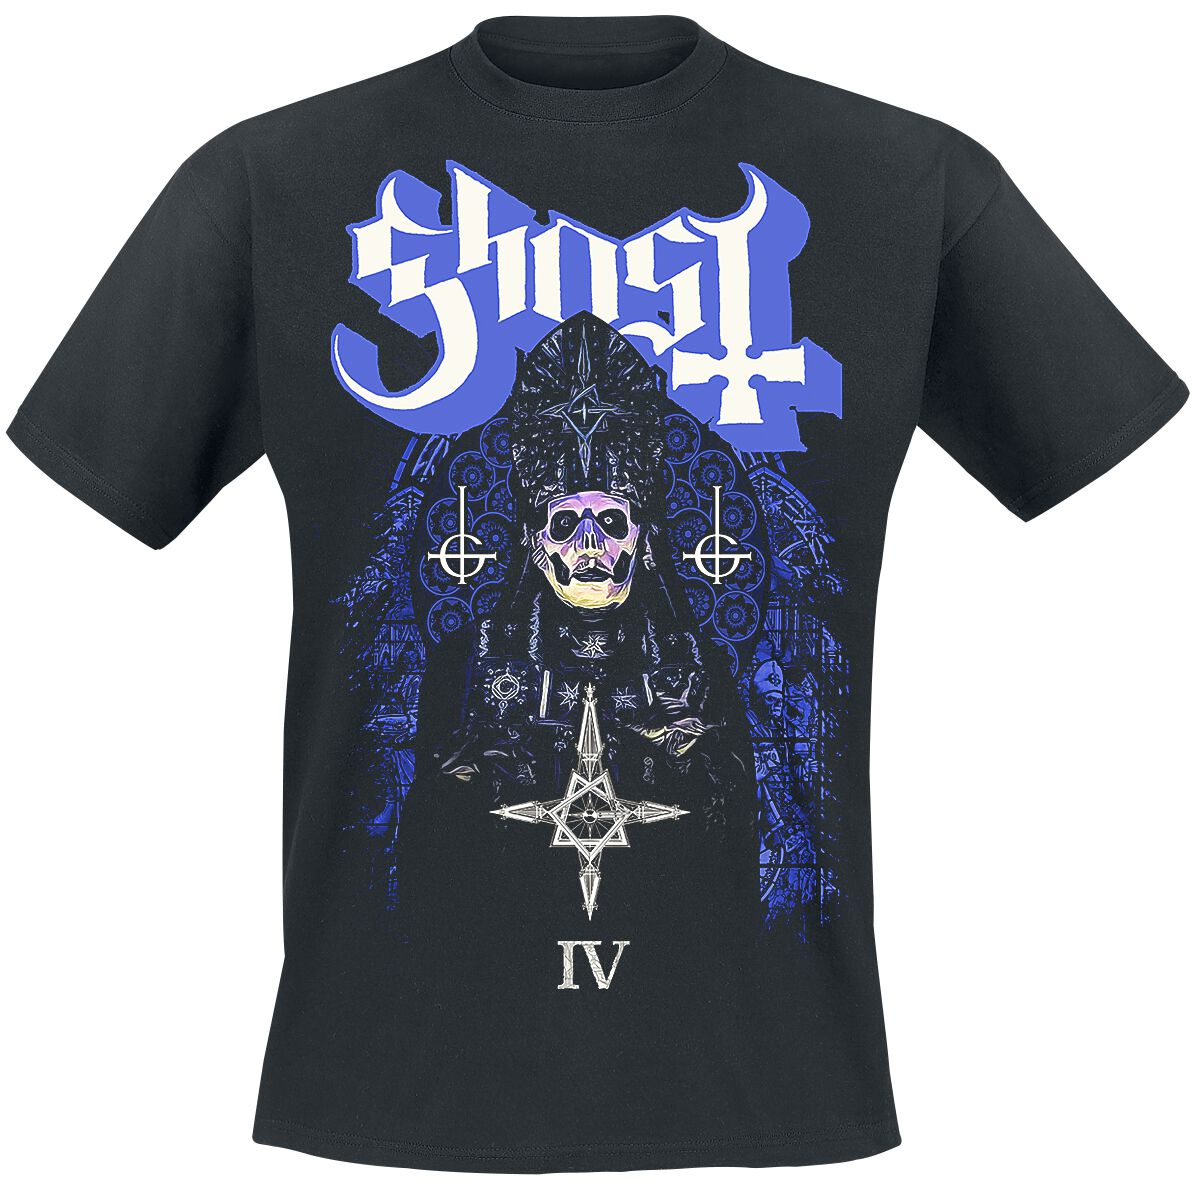 Ghost Stained Glass IV T-Shirt schwarz in XL